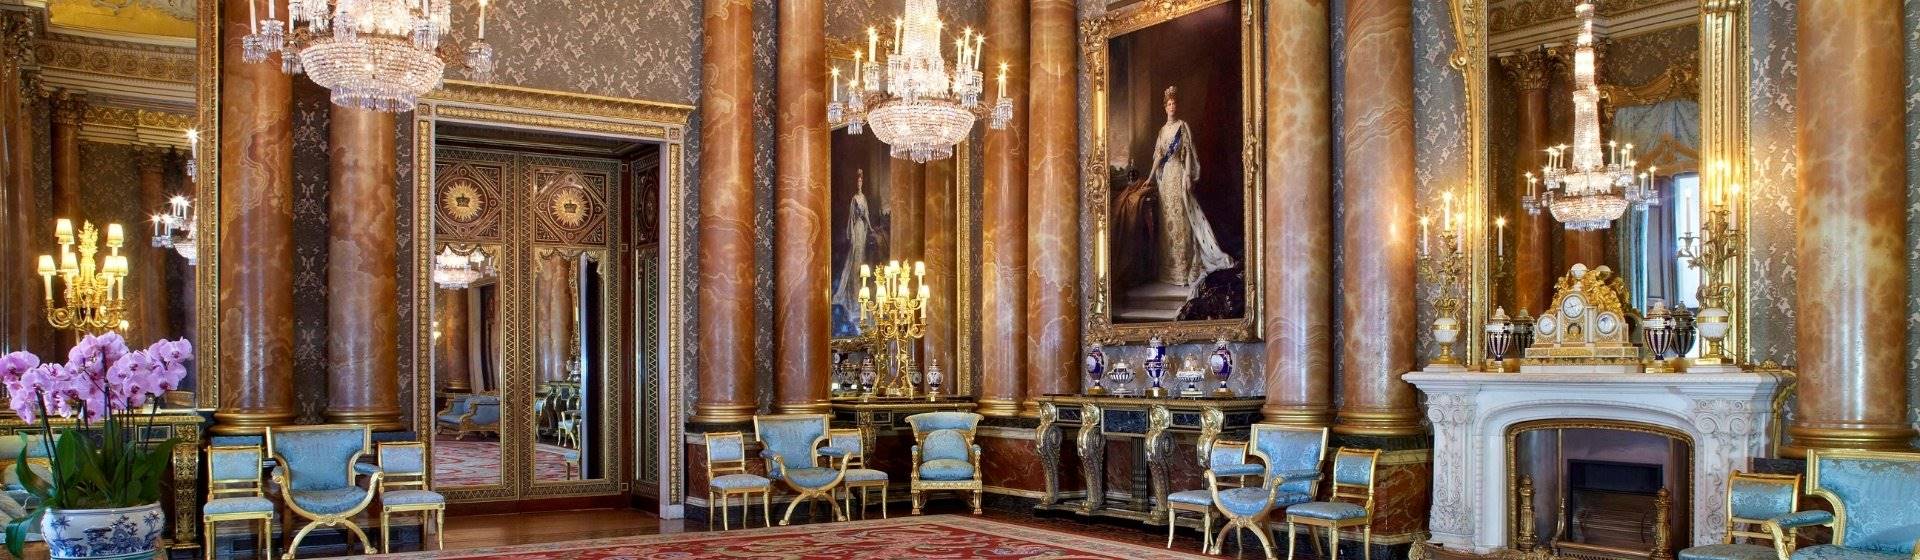 Blue Drawing Room, Buckingham Palace. Peter Smith - Royal Collection Trust, © His Majesty King Charl